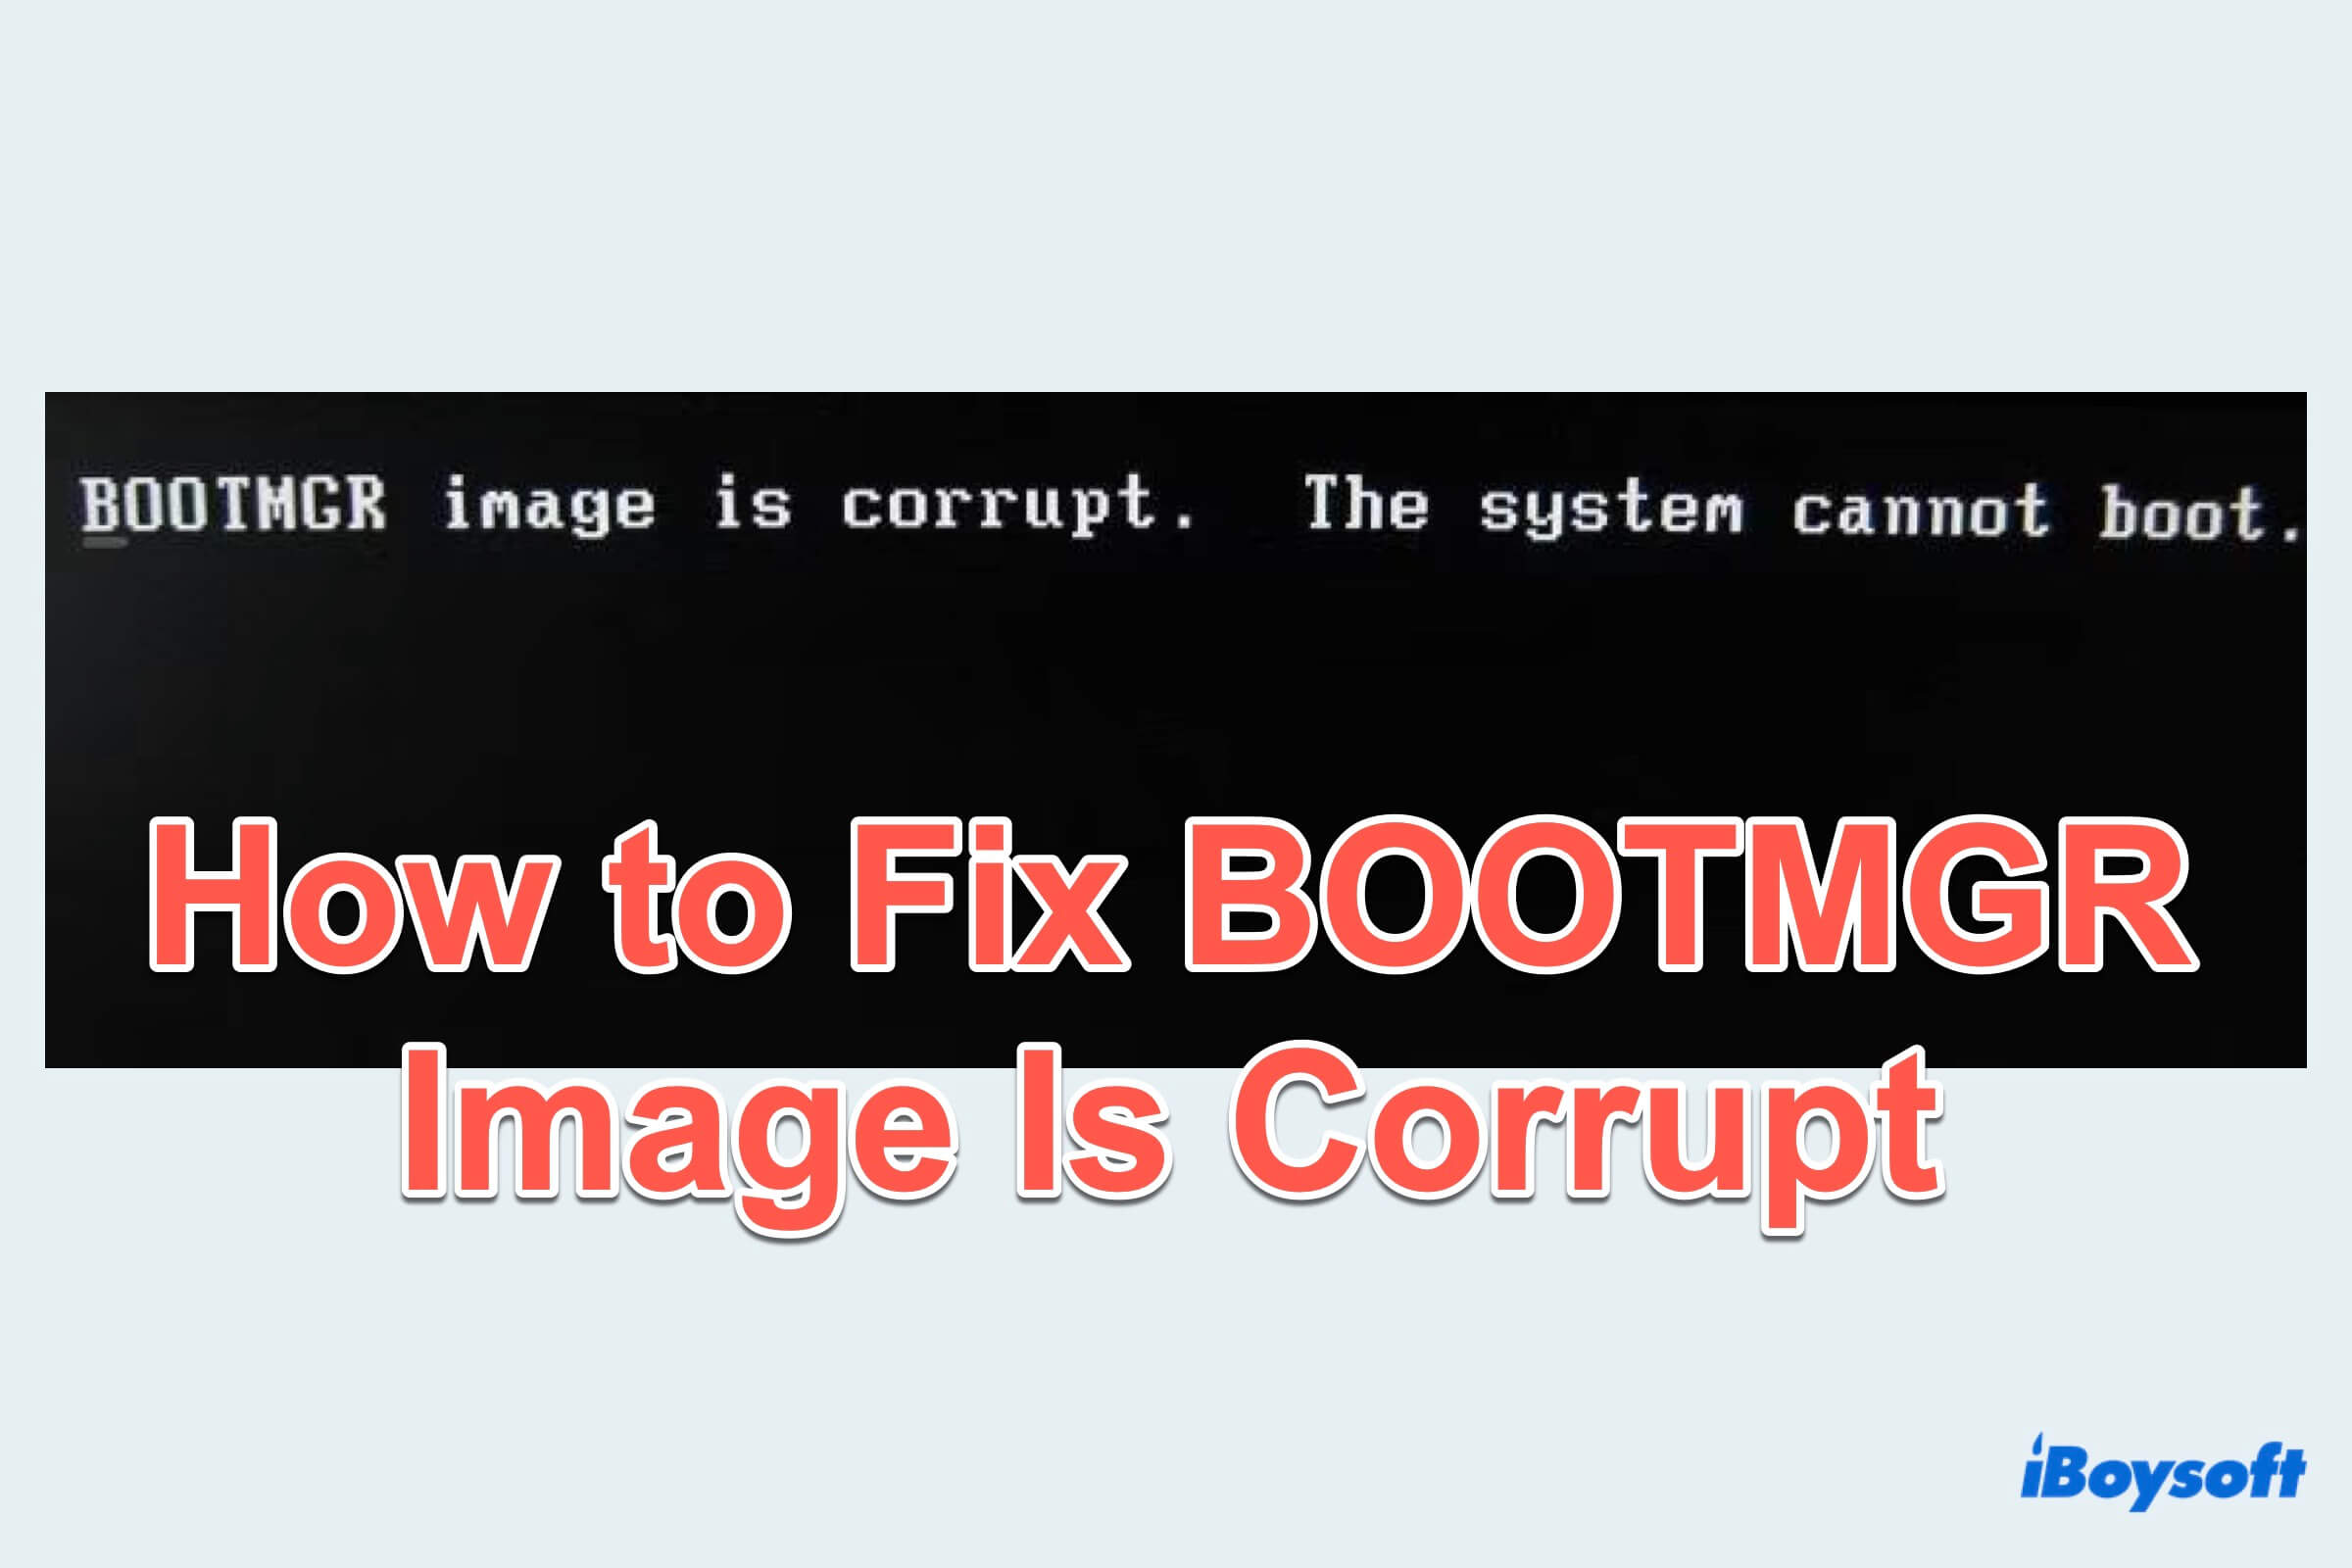 How to Fix BOOTMGR Image Is Corrupted